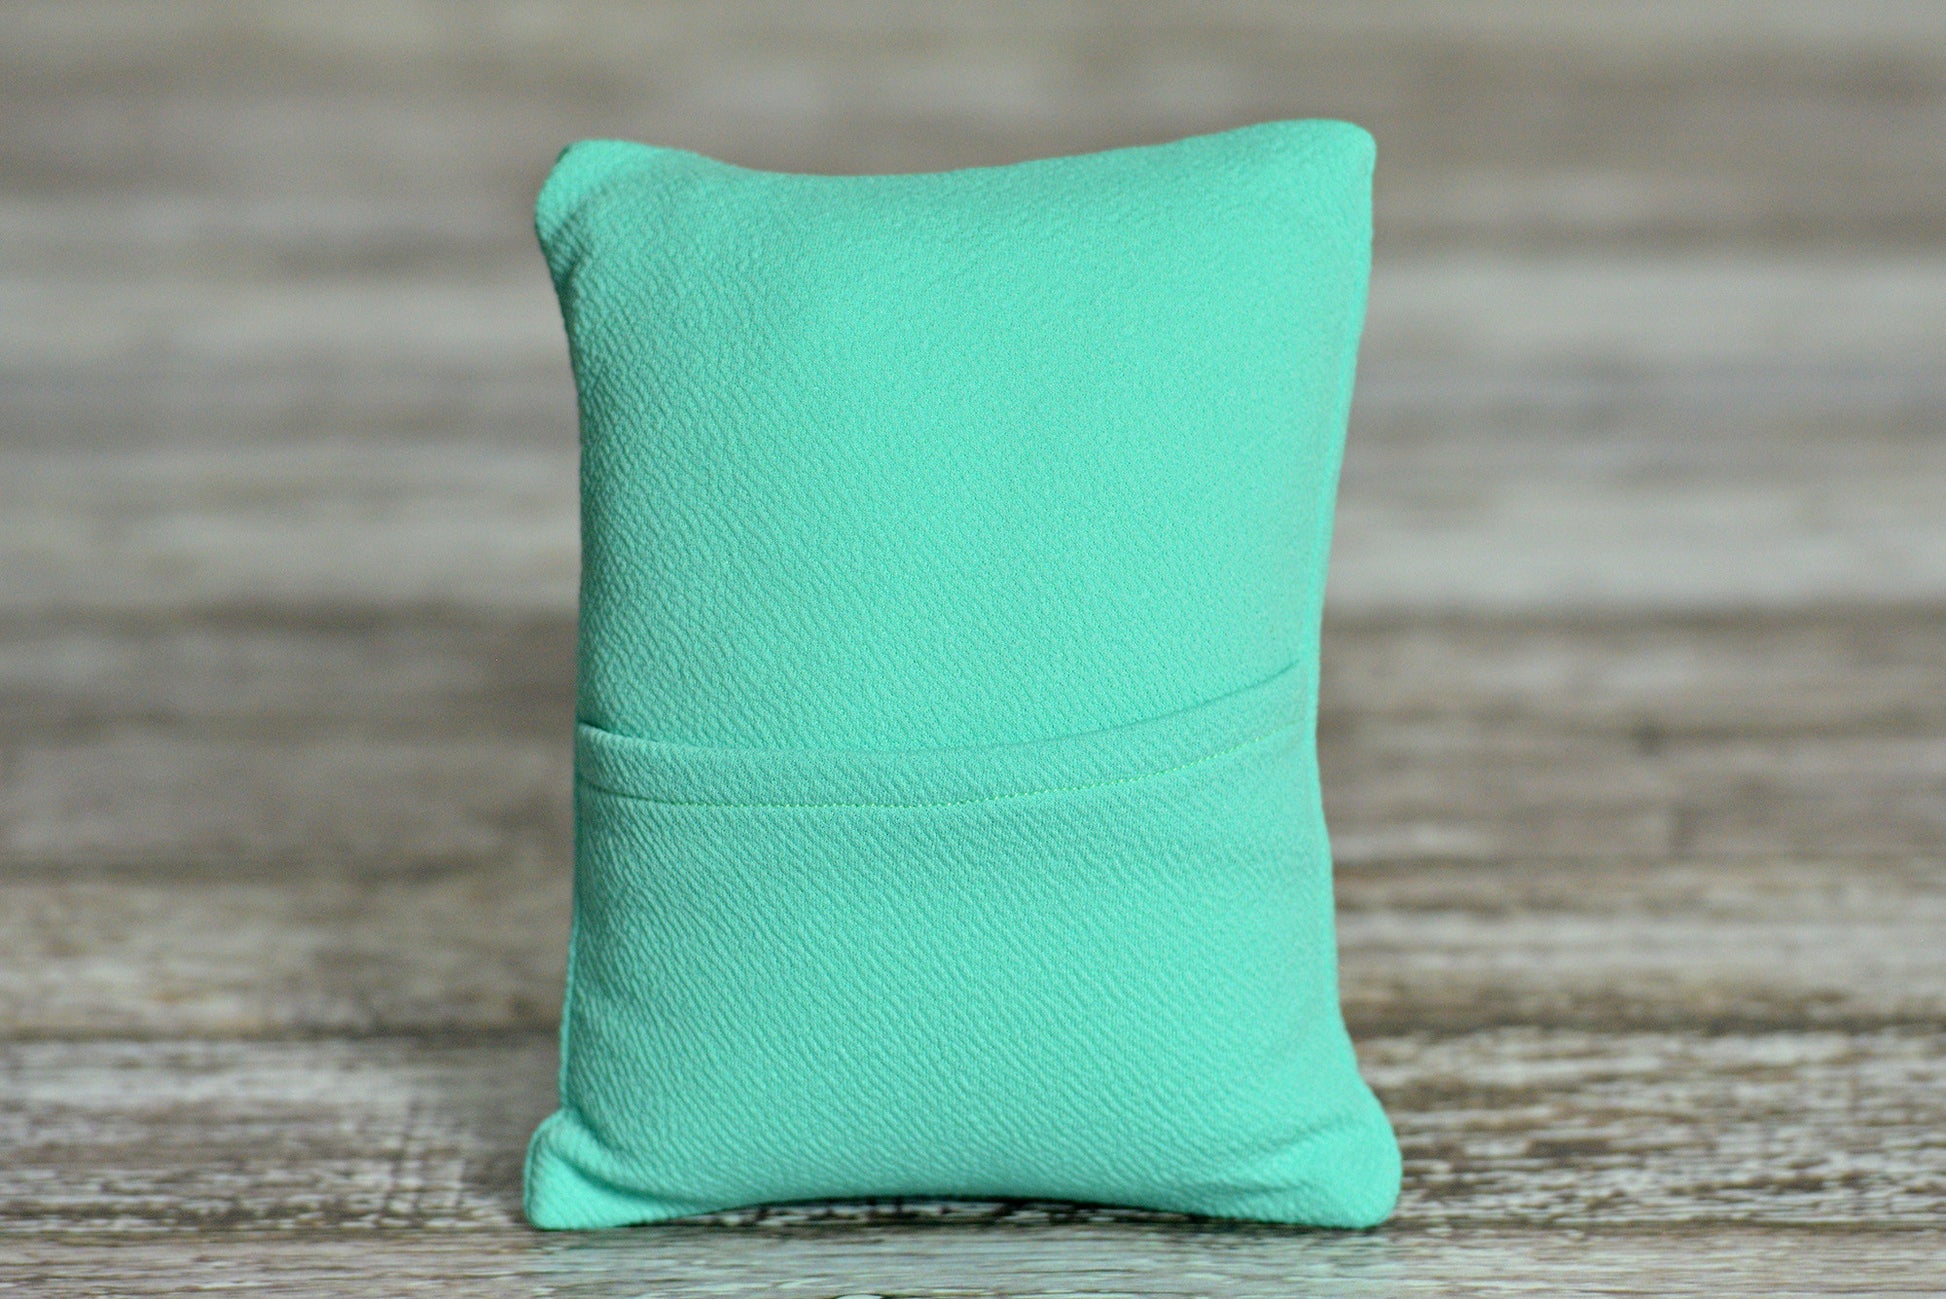 Mini Pillow with Cover - Textured - Mint-Newborn Photography Props